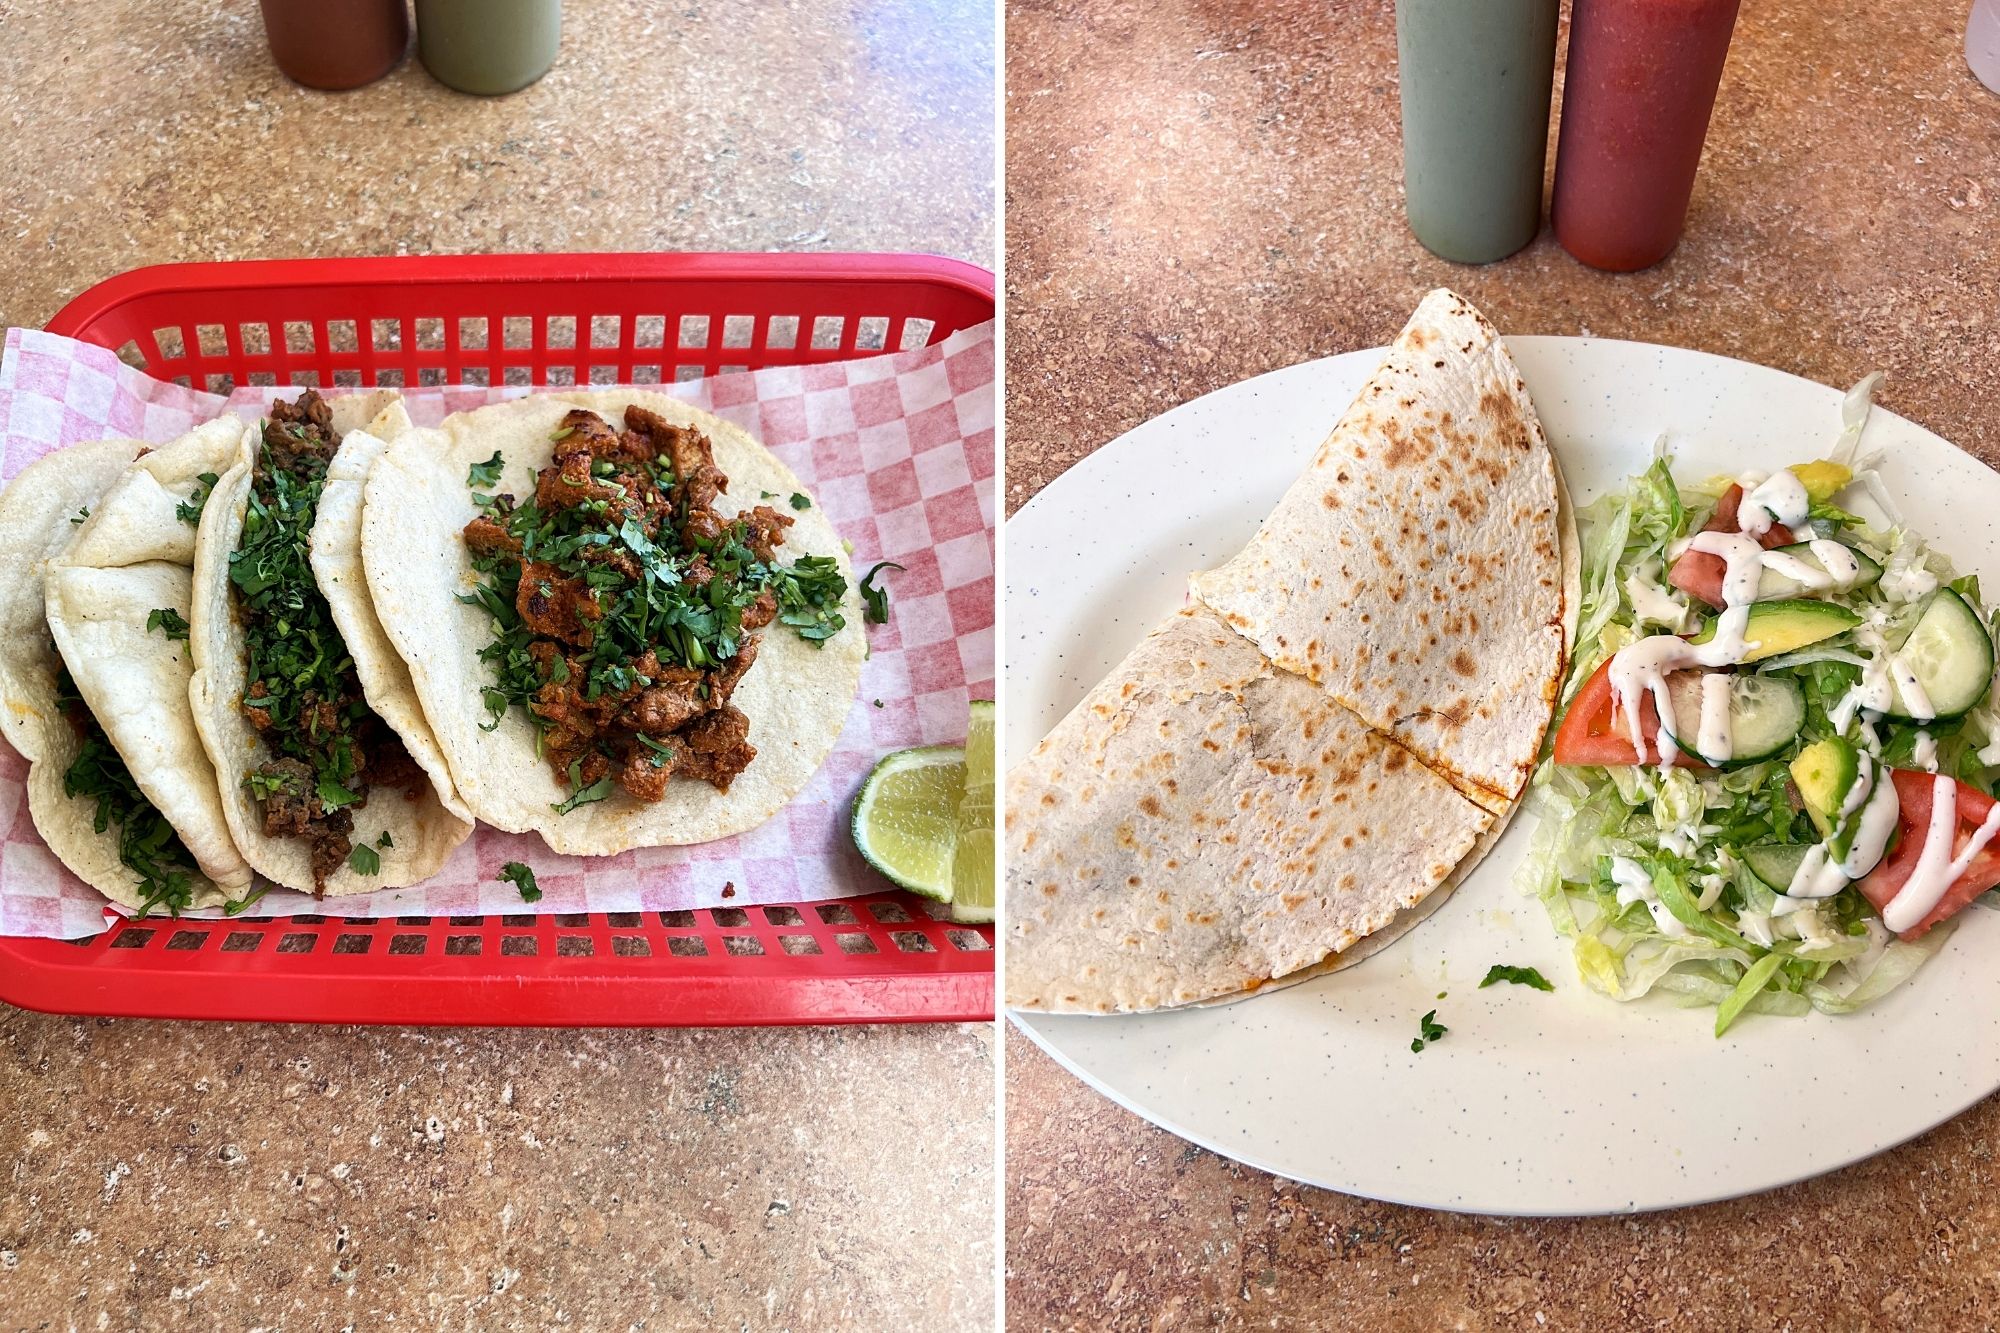 Three tacos and a quesadilla with a side salad